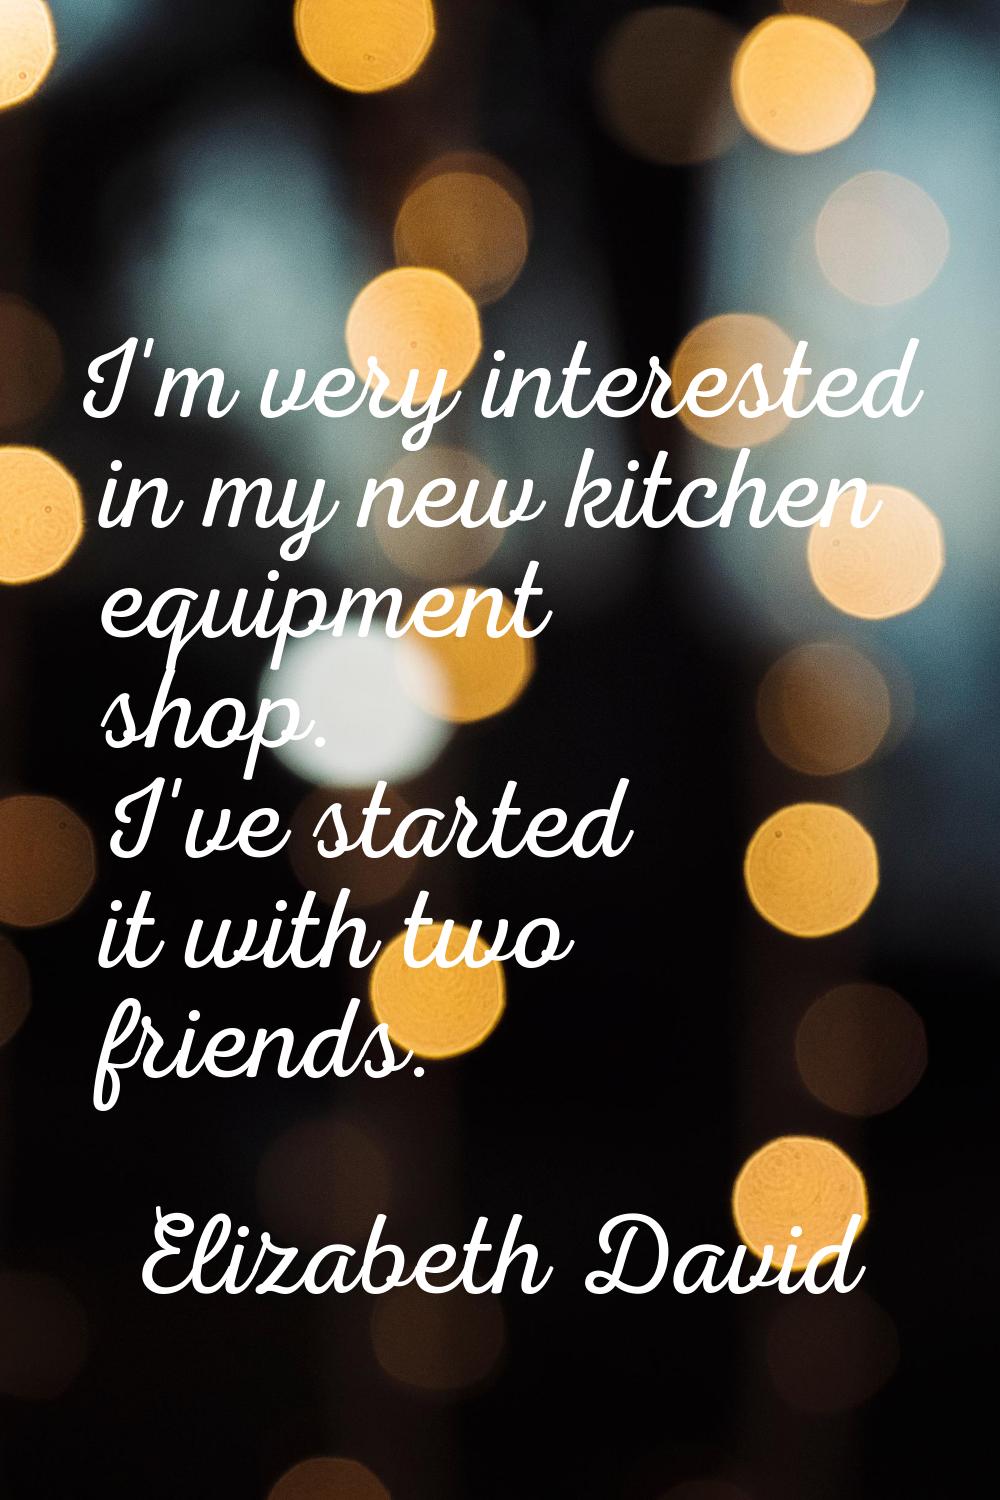 I'm very interested in my new kitchen equipment shop. I've started it with two friends.